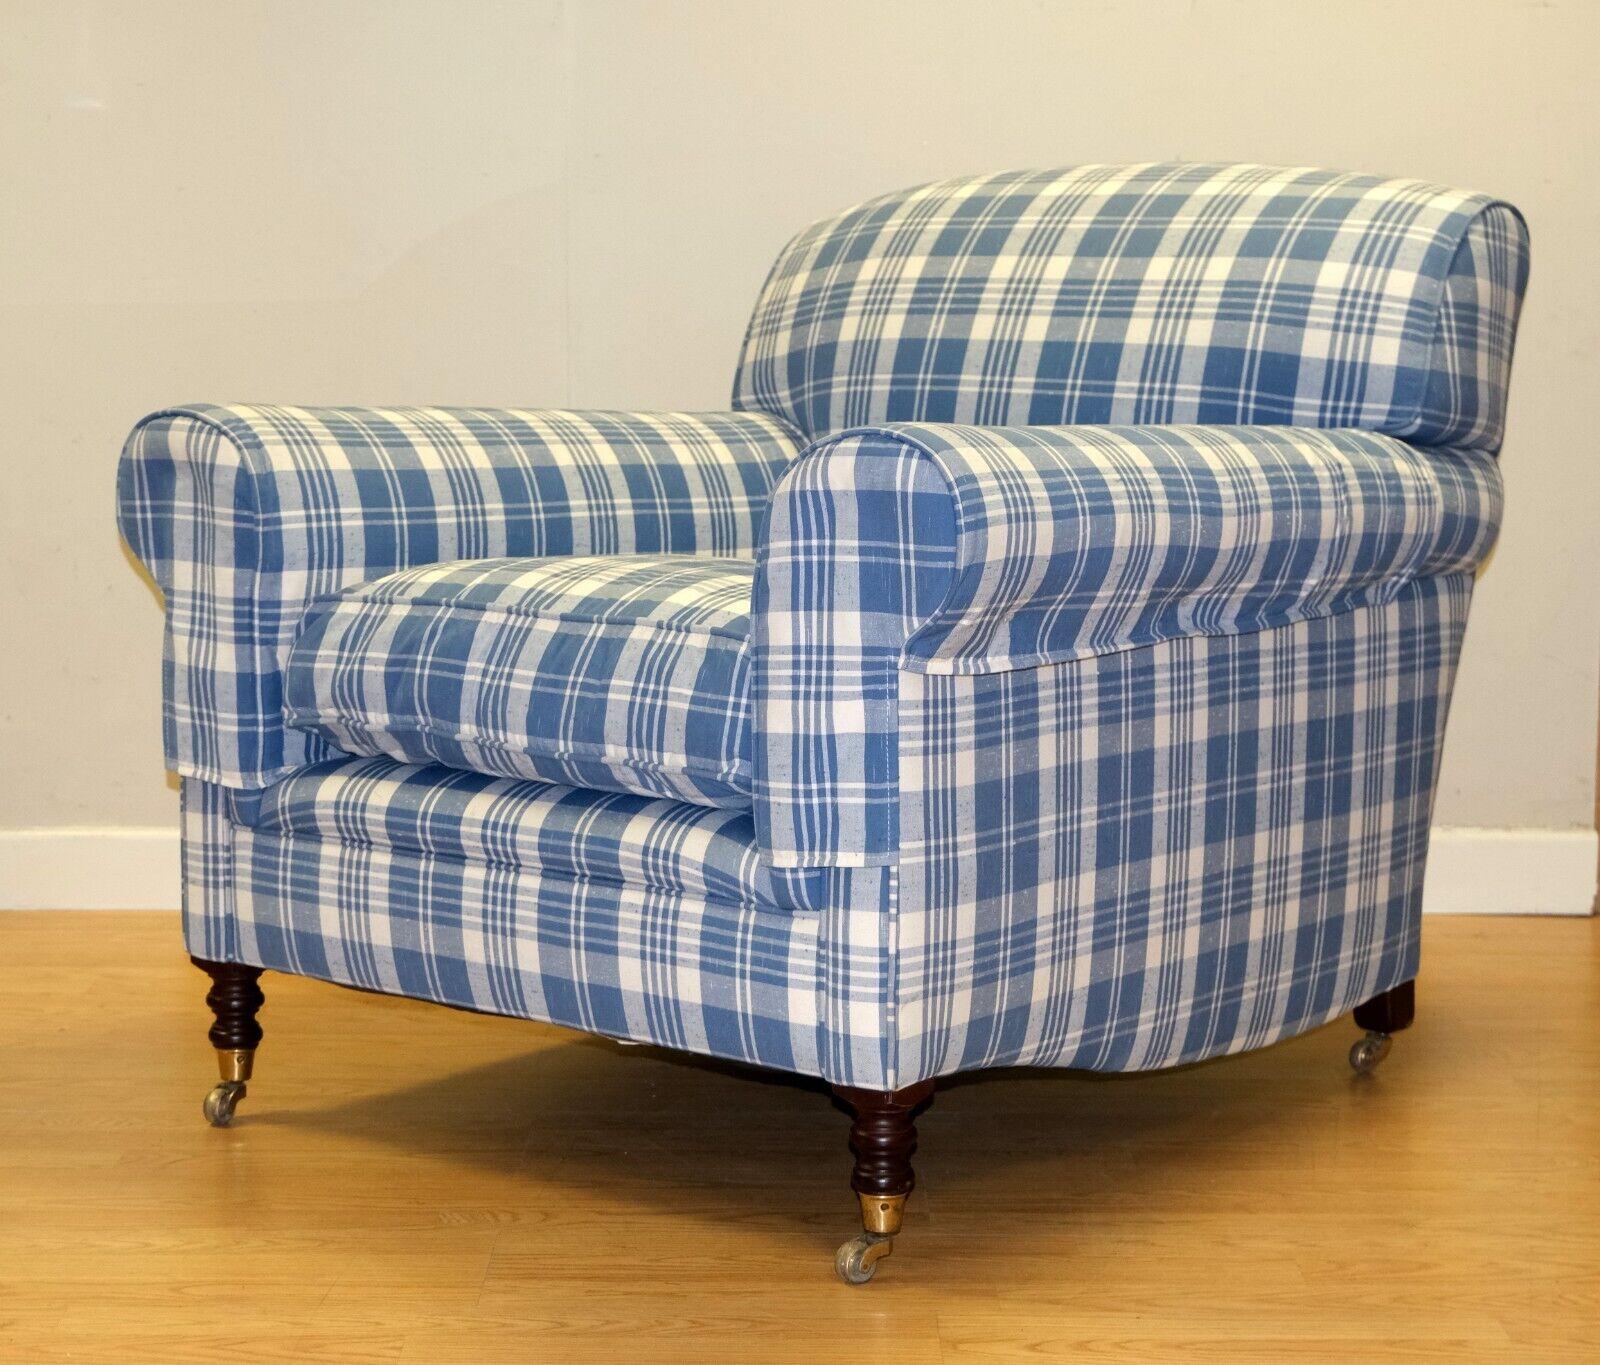 Hand-Crafted George Smith Signature Armchair Full Scroll Arms on Royal Blue Fabric & Castors